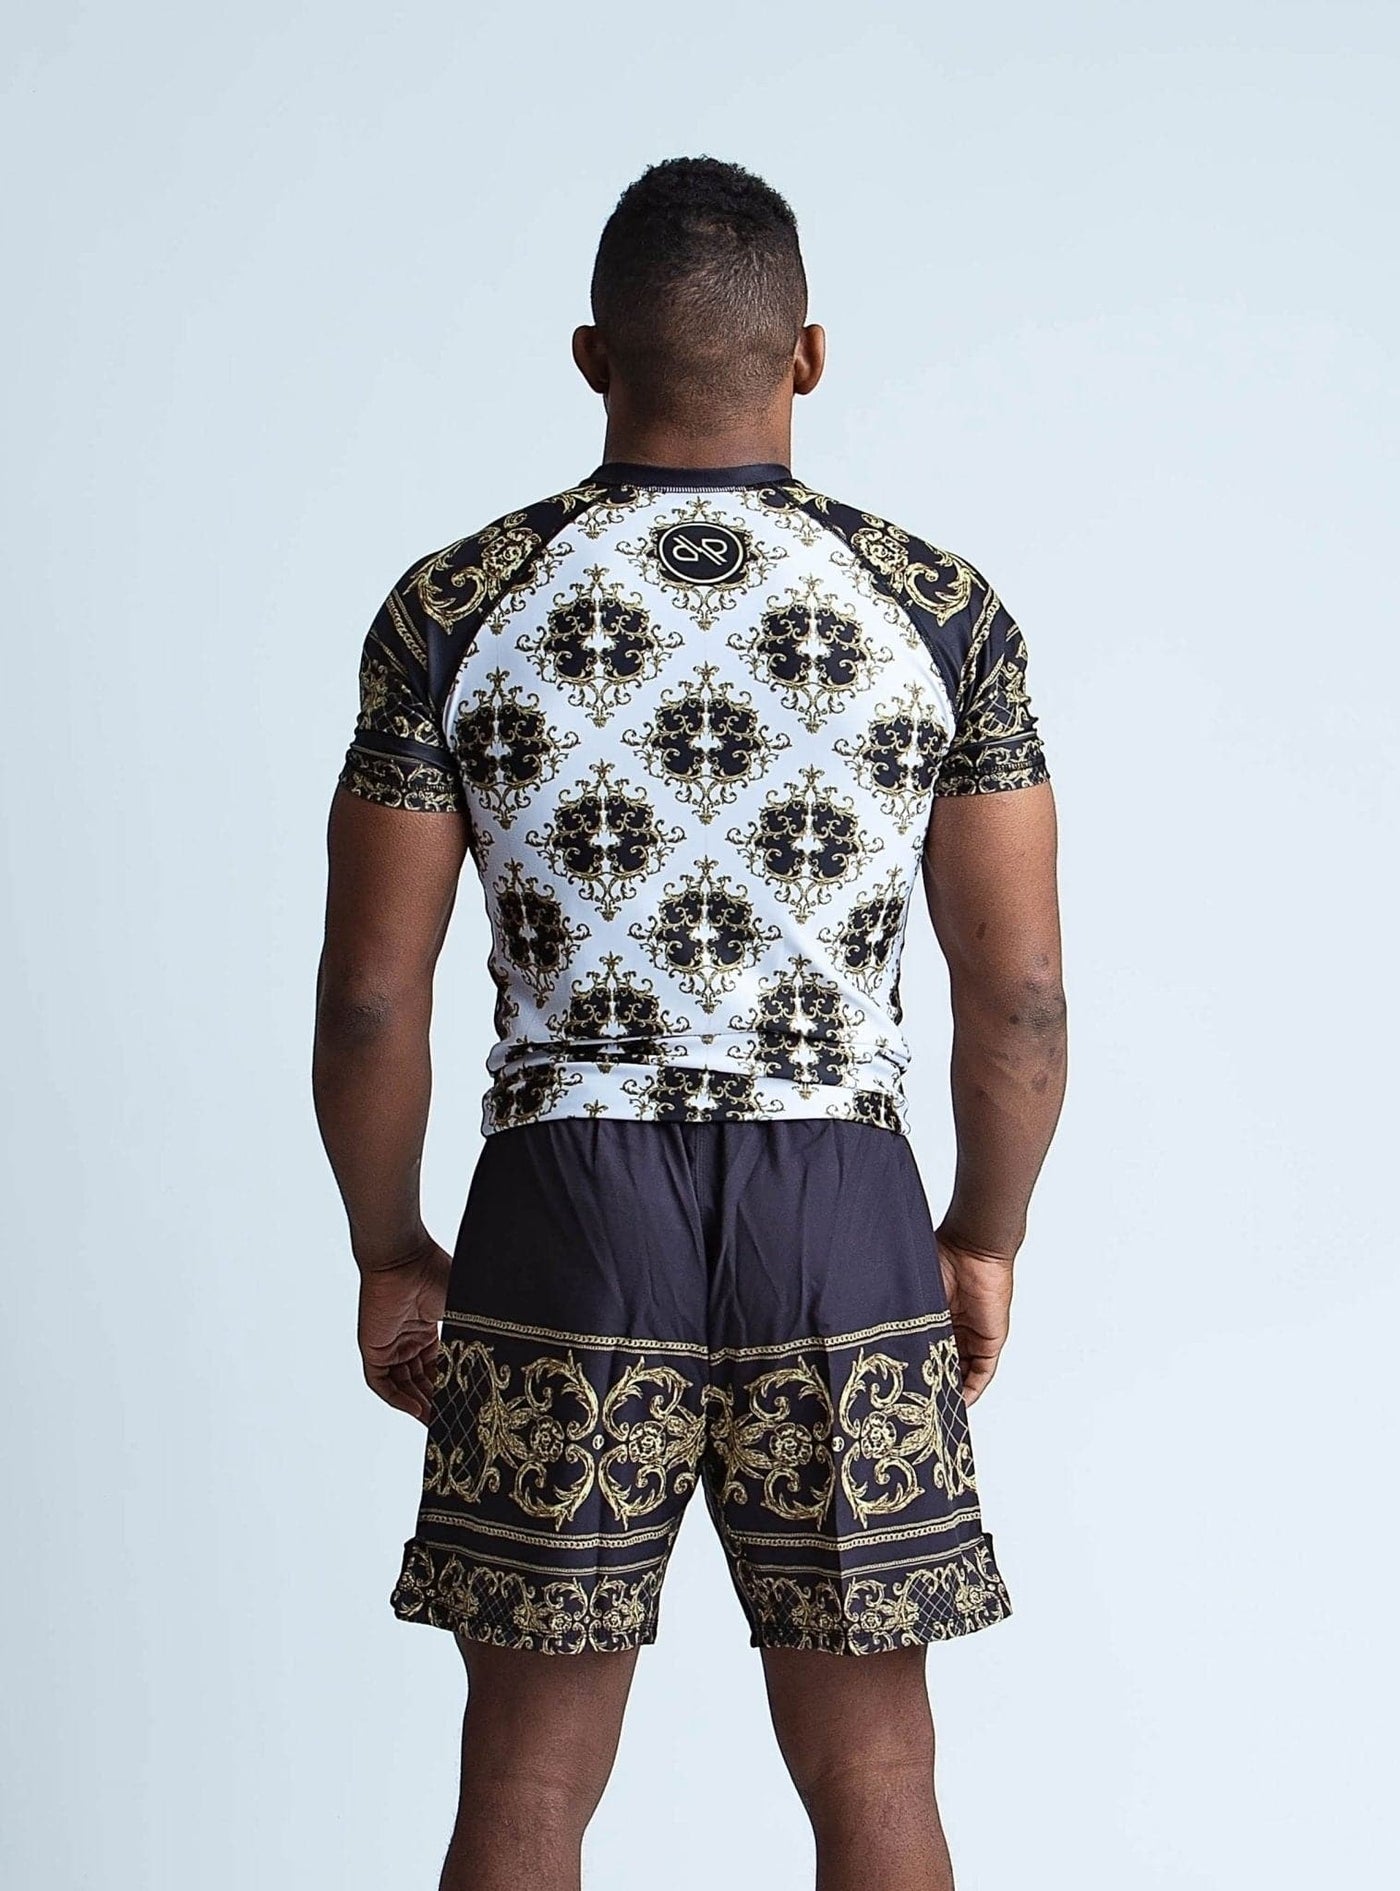 Black and Gold Royal Pattern Motif Shorts - RollBliss